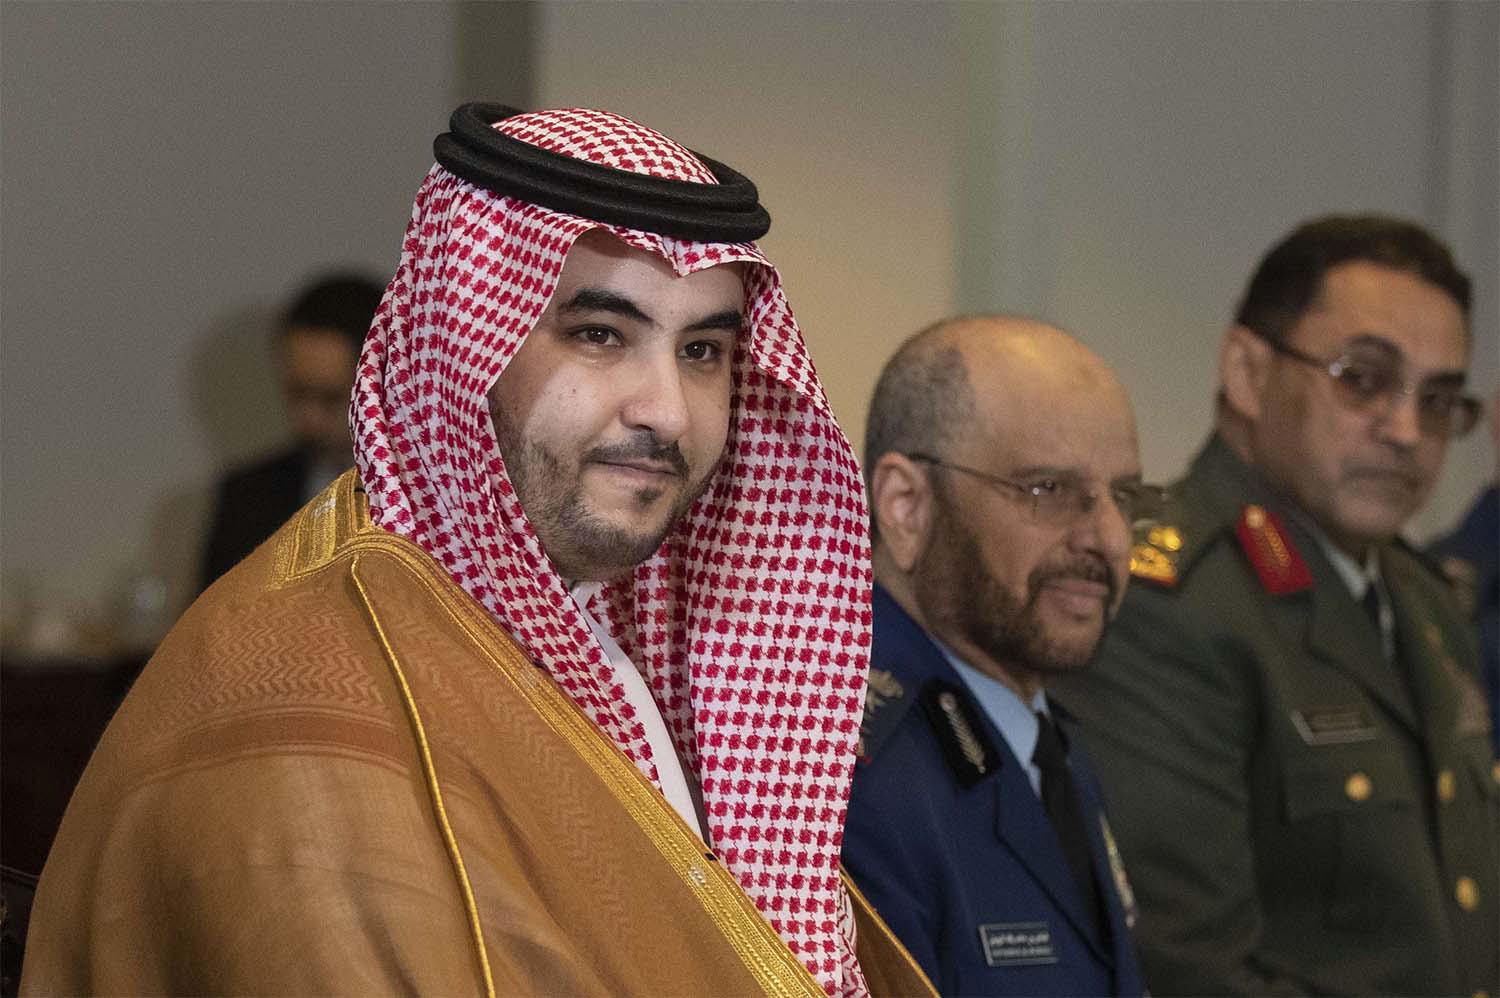 The killing of Khashoggi might be raised during Prince Khalid’s meeting with State Department officials